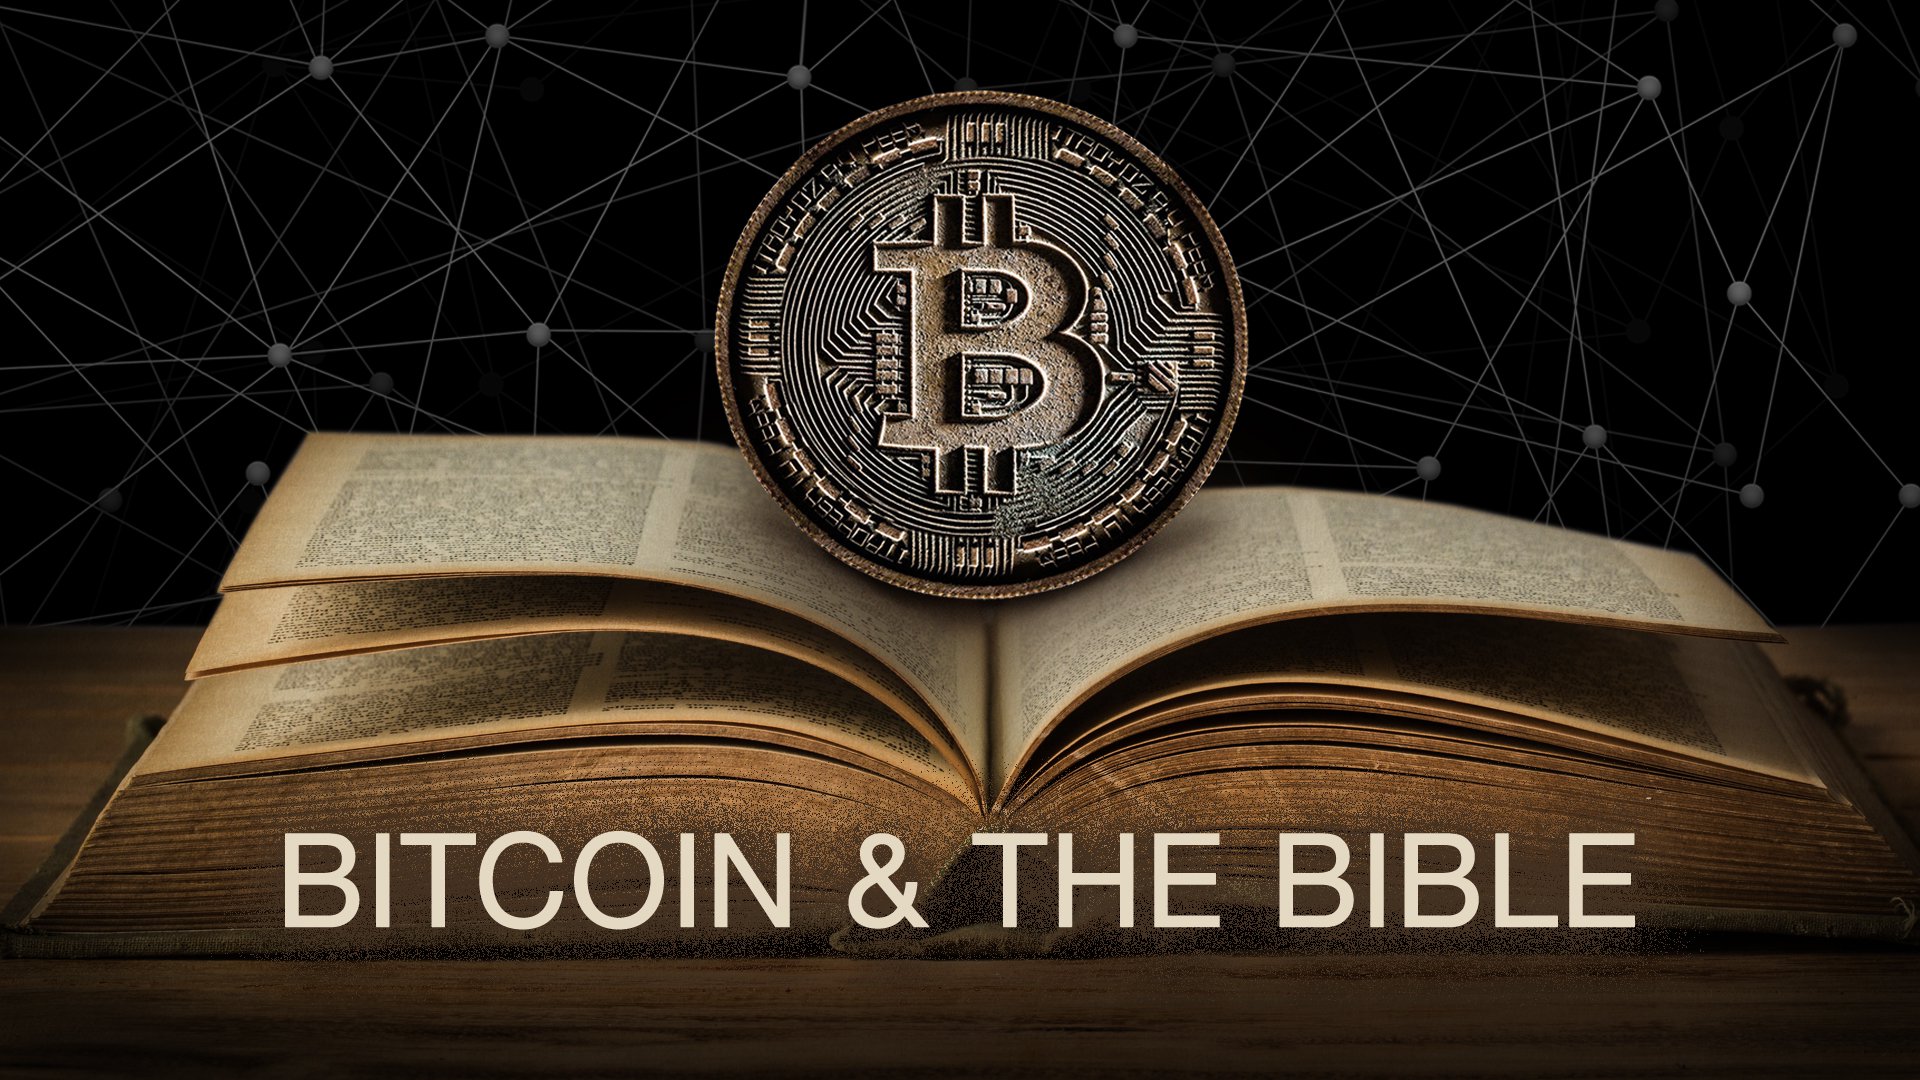 The Bible & Crypto (Should Christians invest in Bitcoin?)